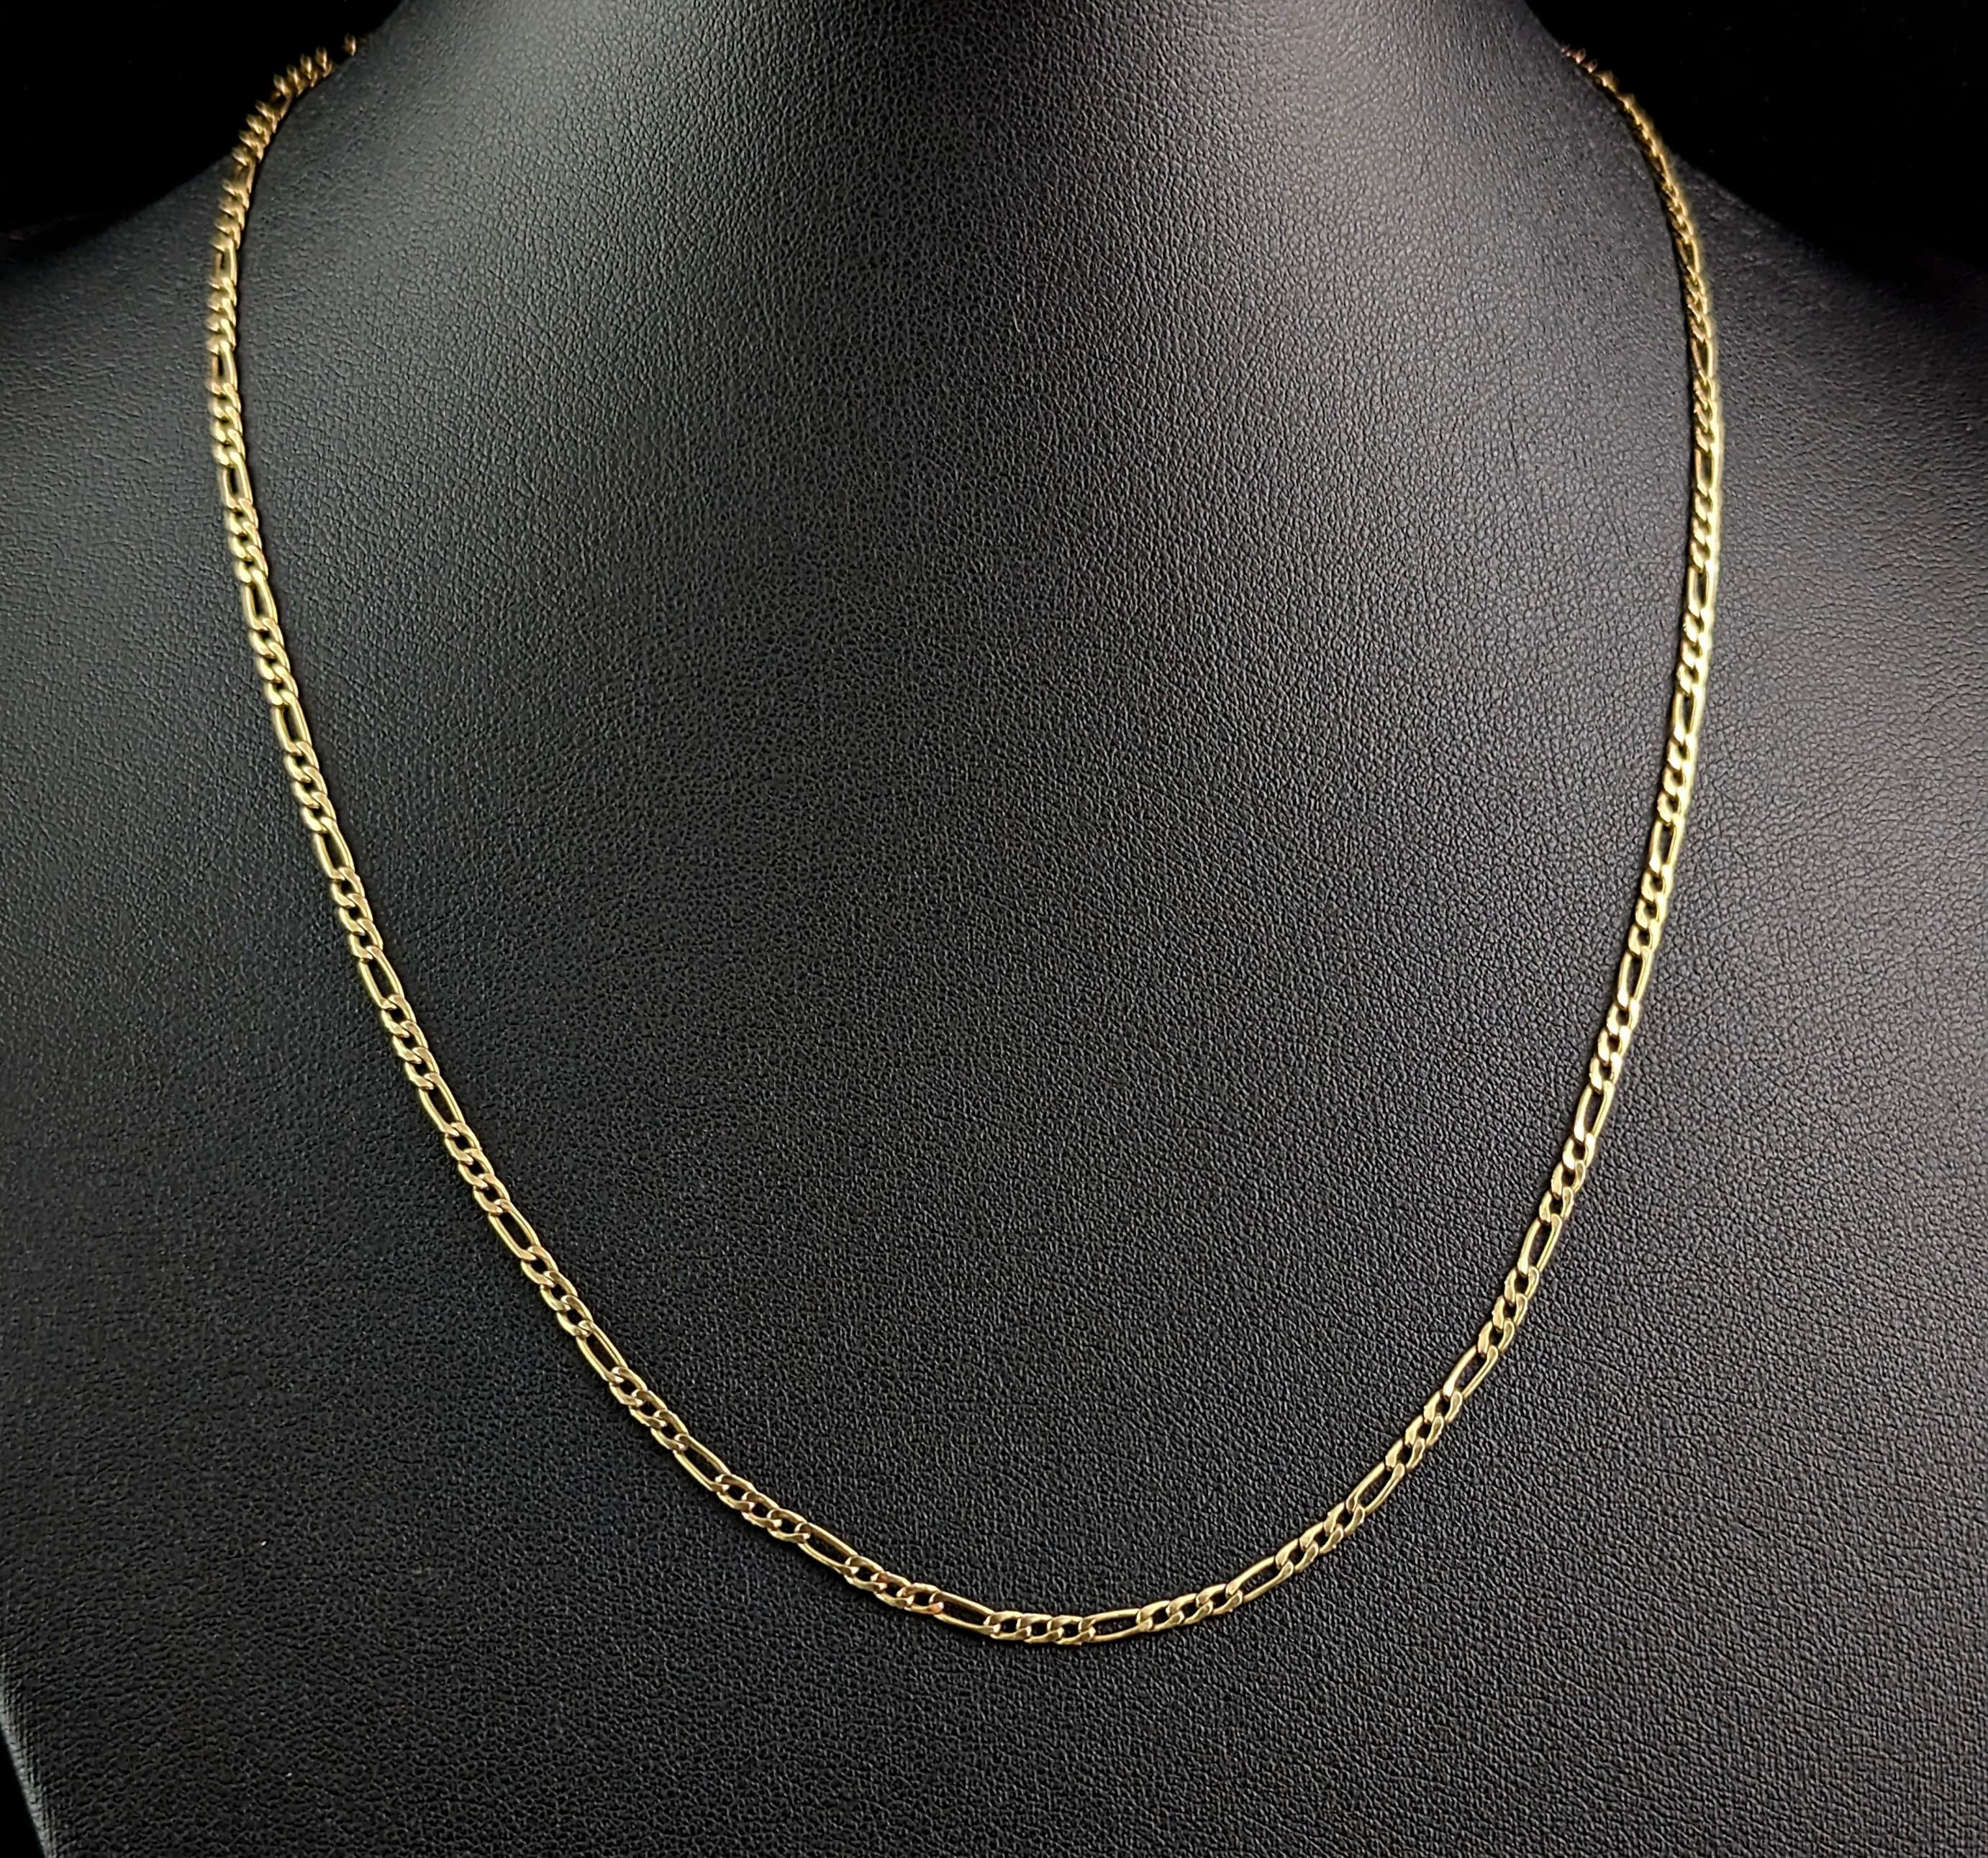 A vintage gold chain is such an important staple for all jewellery collections, this gorgeous vintage, 90s era 9ct yellow gold figaro link Chain necklace is a great choice.

Attractive figaro links in a rich 9ct yellow gold in a nice wearable